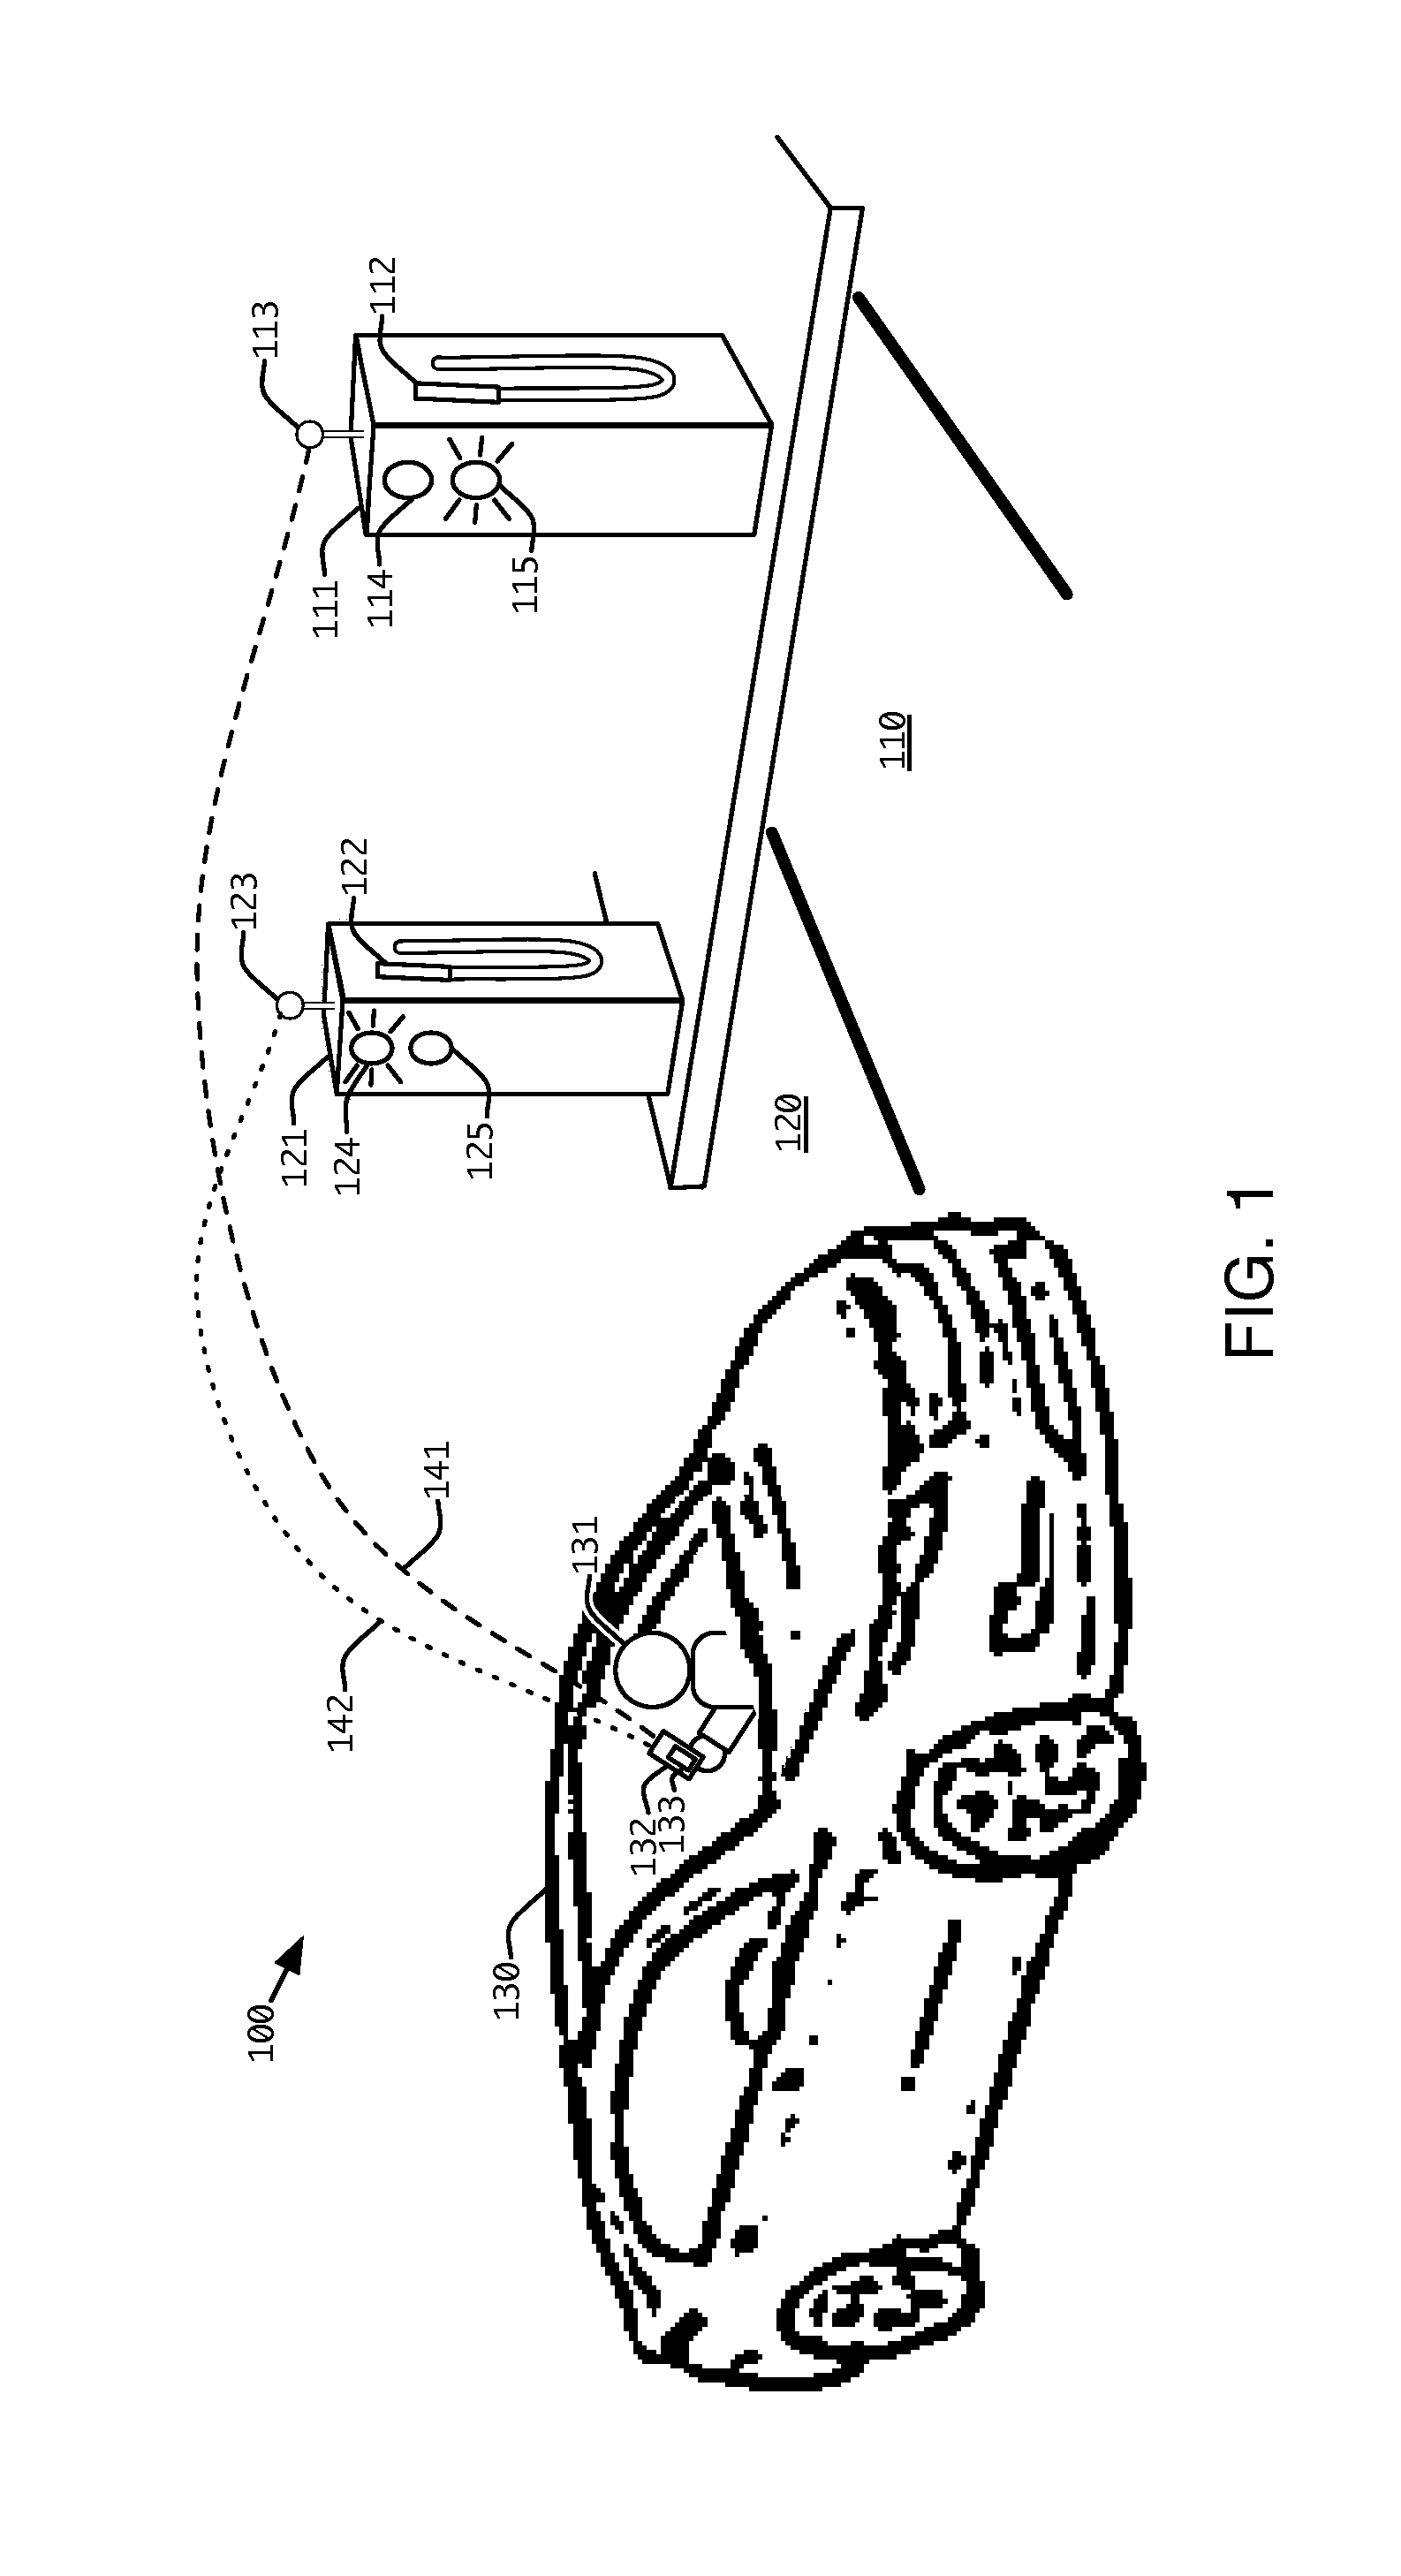 Method and apparatus for finding and accessing a vehicle fueling station, including an electric vehicle charging station